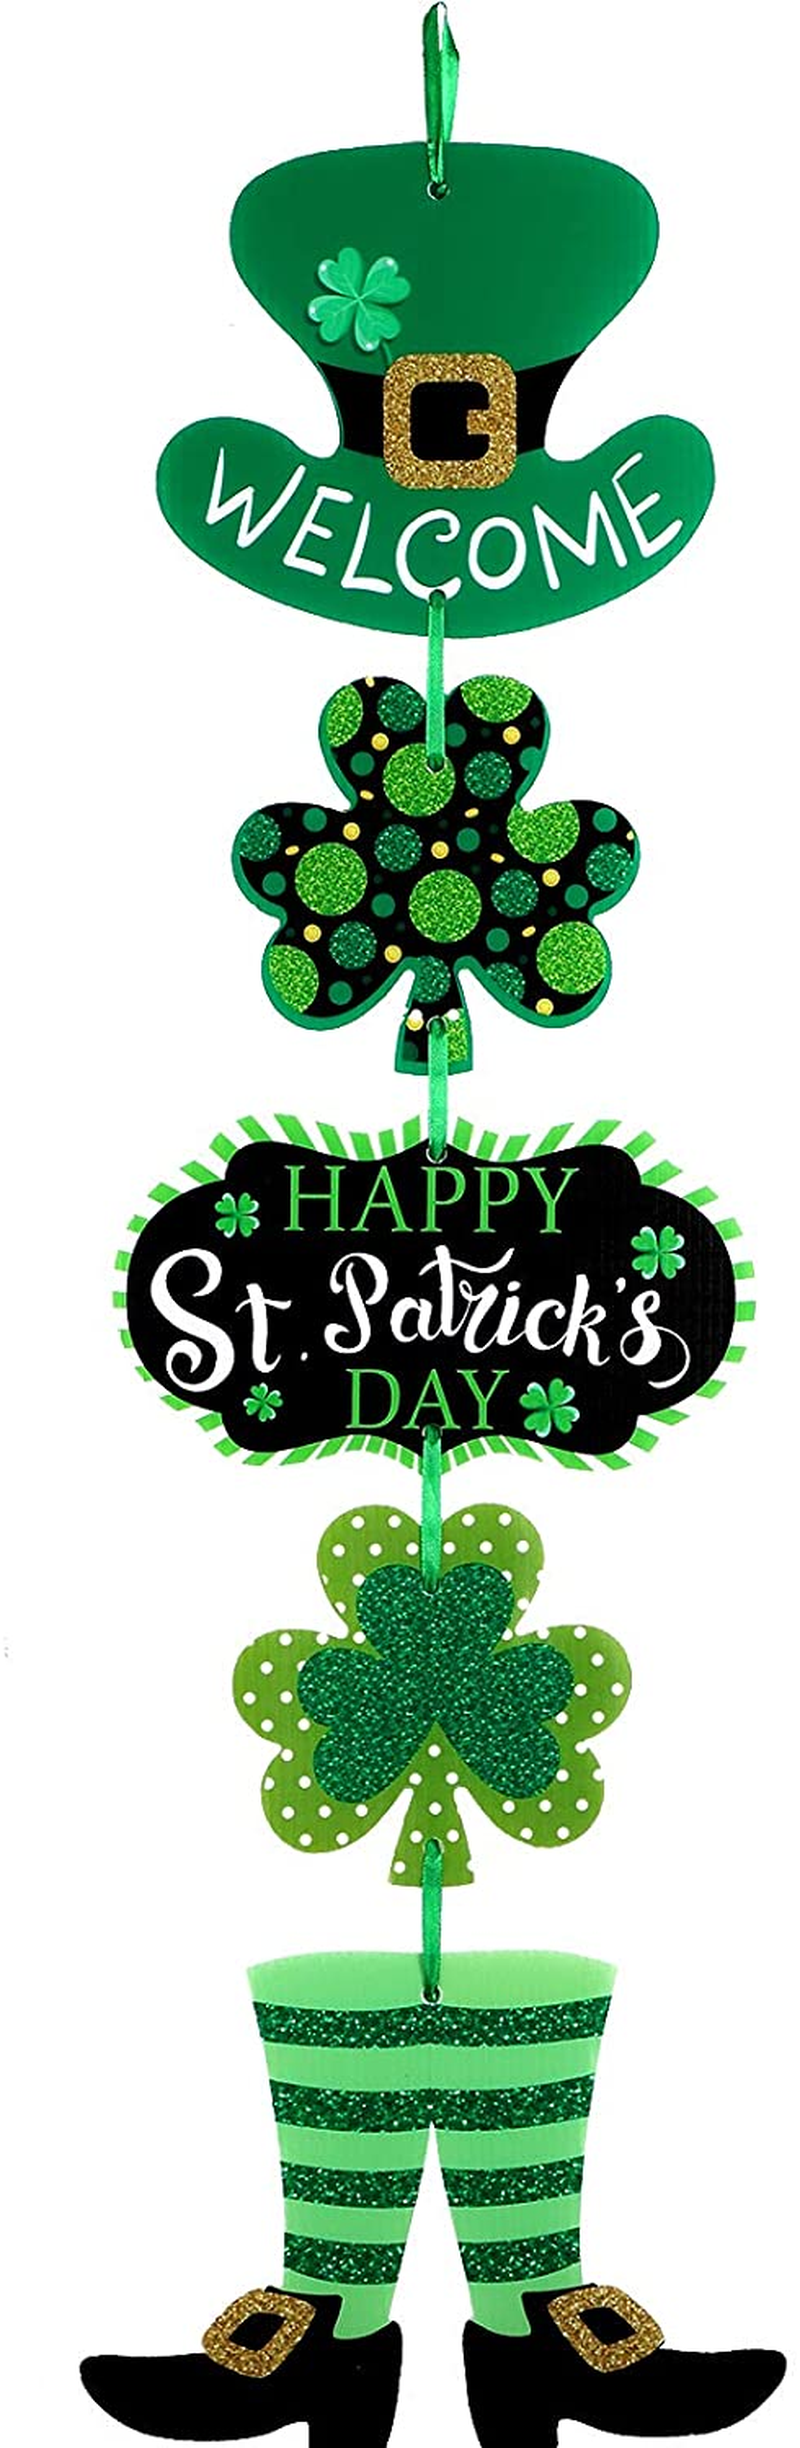 St. Patrick'S Day Door Sign St. Patrick'S Day Themed Hanging Welcome Sign Irish Hanging Door Decor with Shamrock Leprechaun High Hat and Feet Wall Sign Ornament for St. Patrick'S Day Decoration